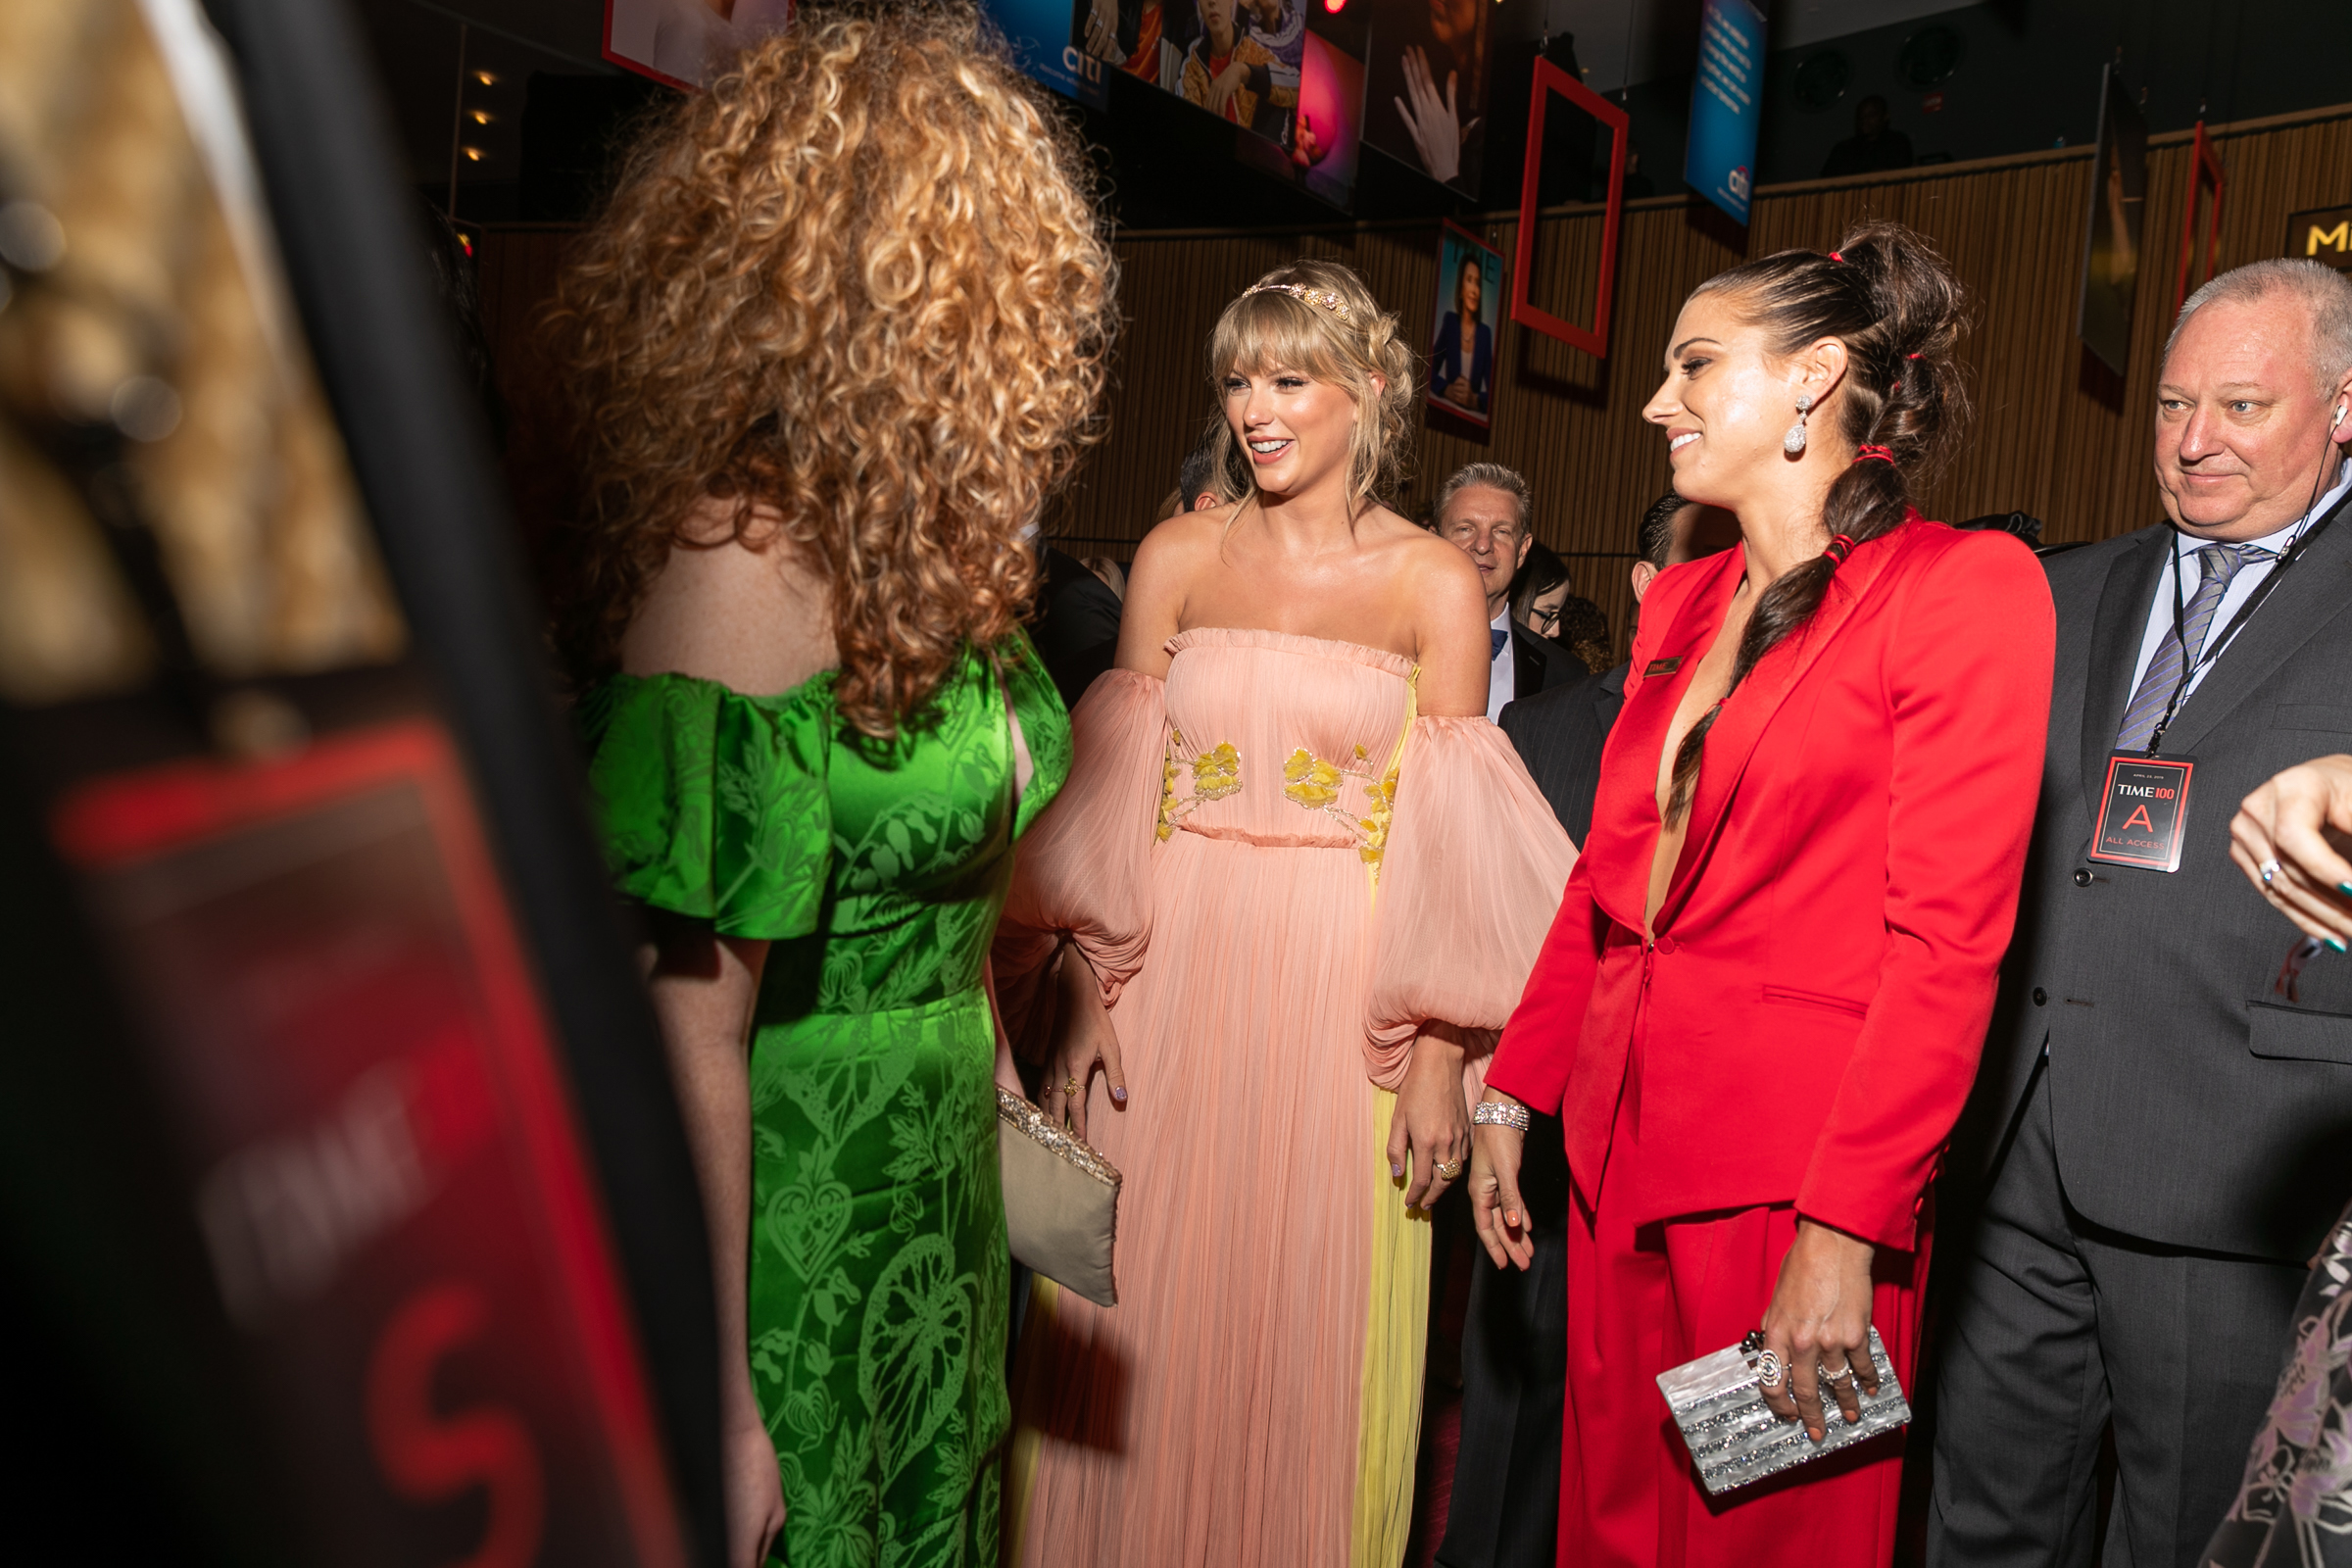 Taylor Swift at the Time 100 Gala at Jazz at Lincoln Center in New York City on April 23, 2019.